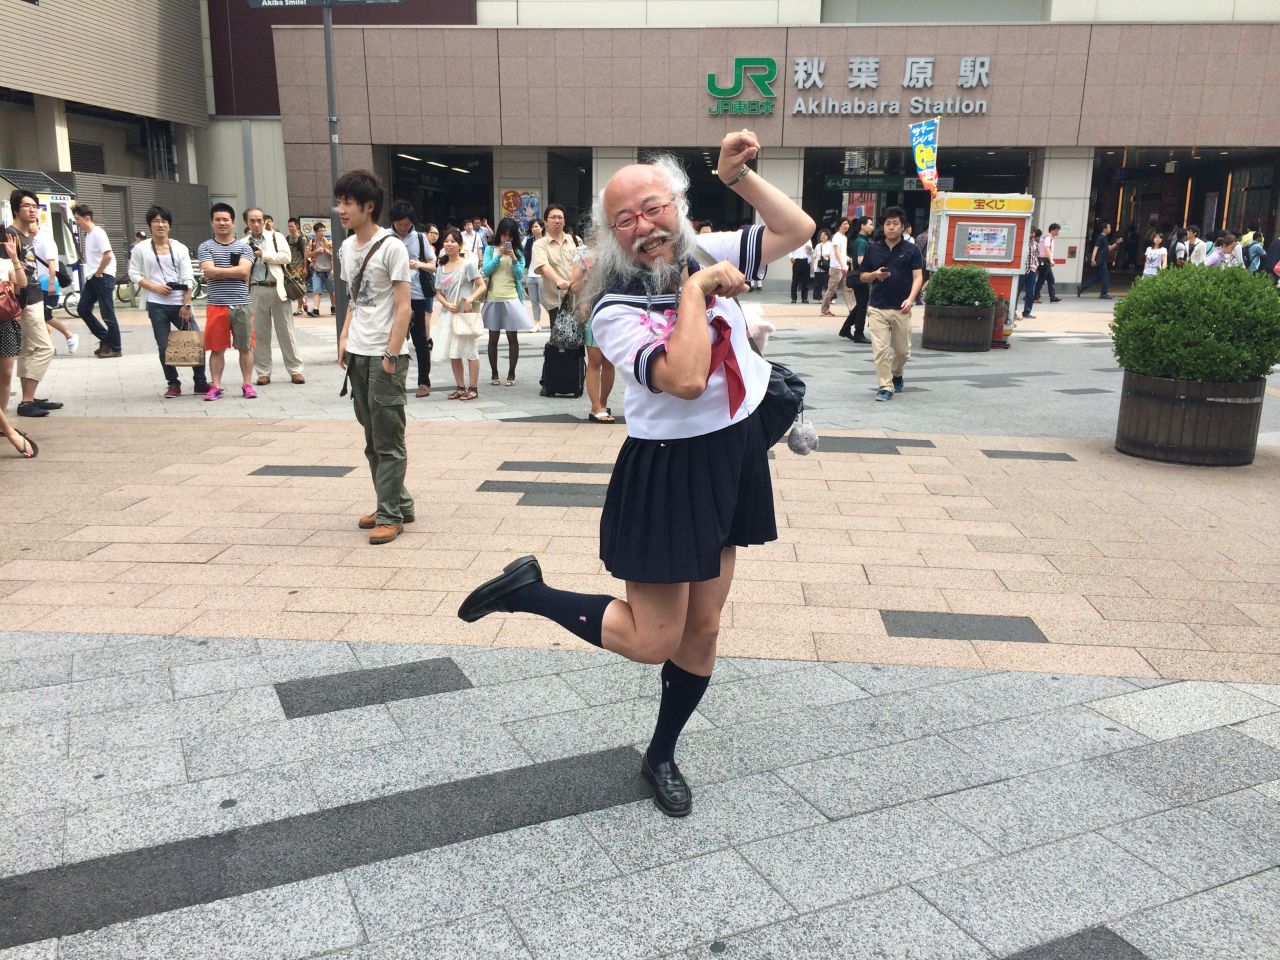 Hideaki Kobayashi, 51, strikes his signature "cat" pose outside Akihabara station in Tokyo on Sunday July 13.  Underneath the Japanese schoolgirl facade, he is a patent-holding computer engineer and accomplished photographer.